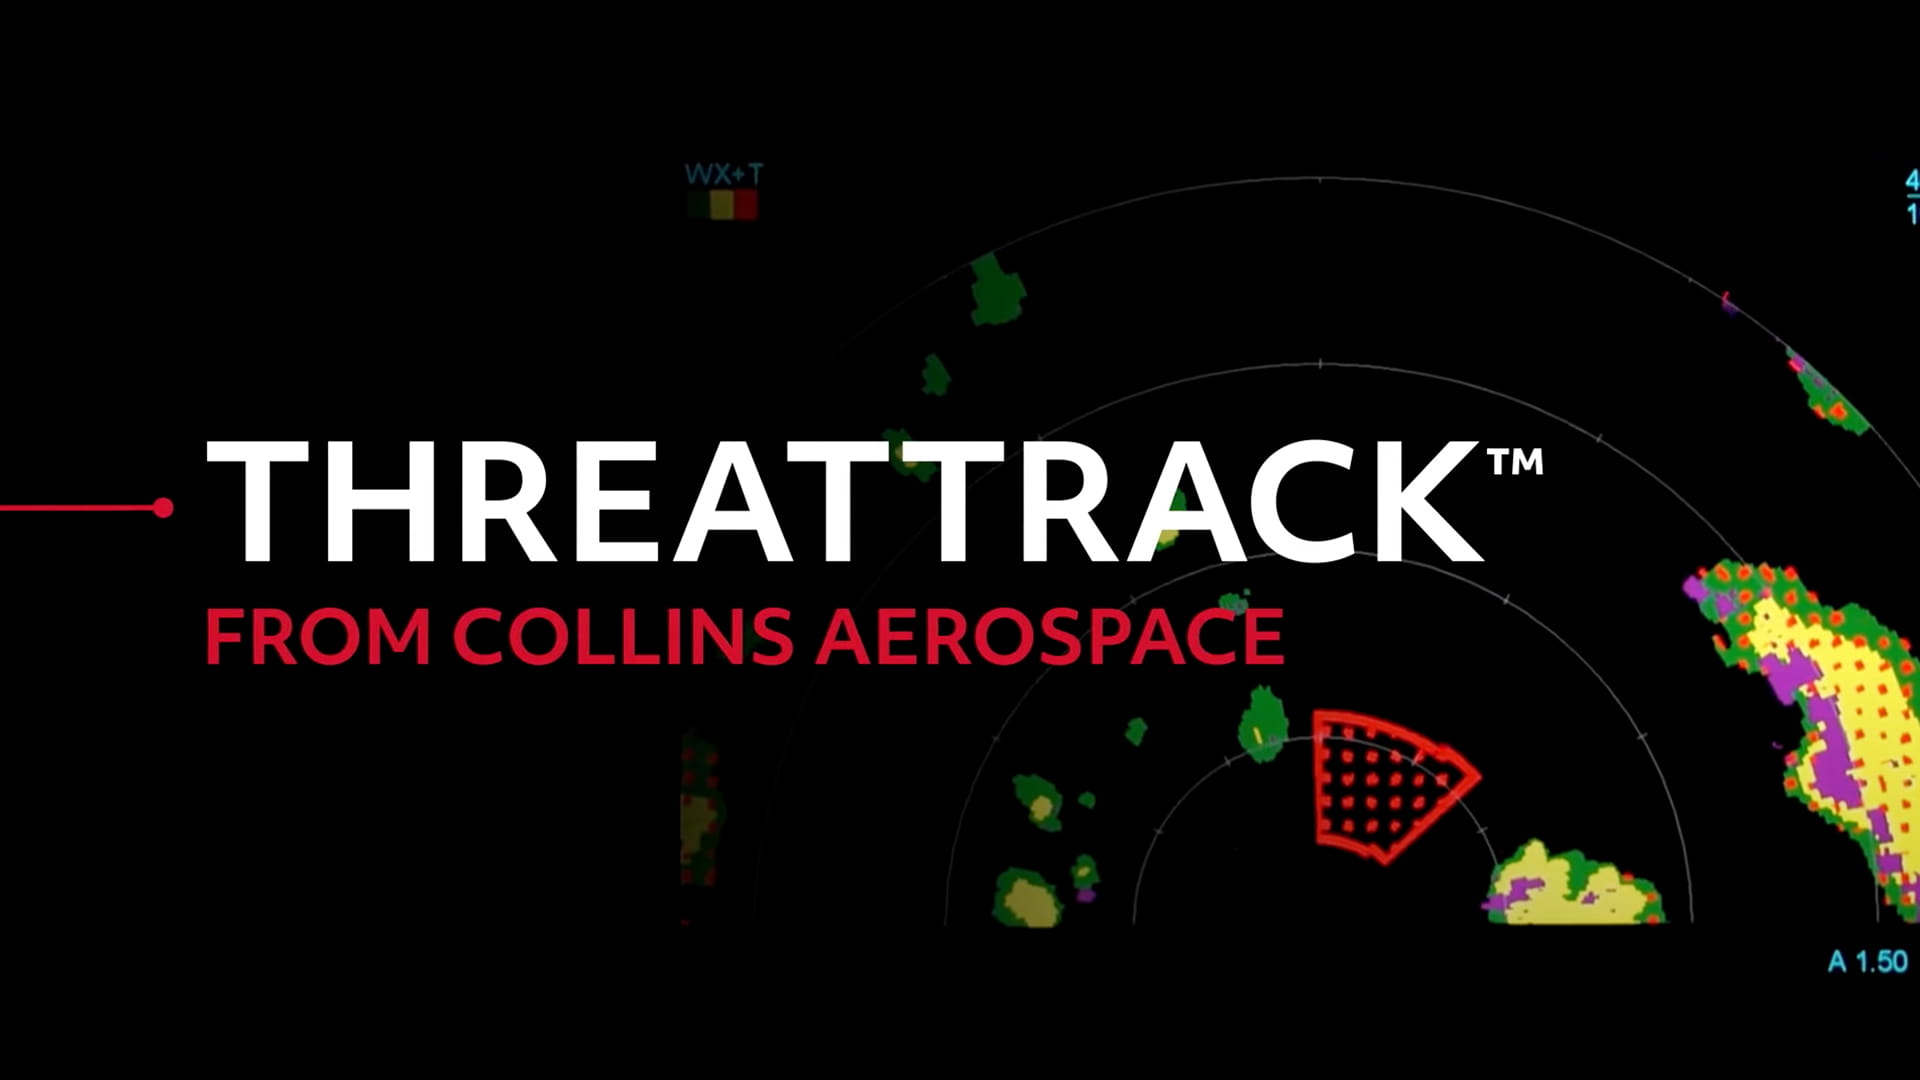 ThreatTrack from Collins Aerospace